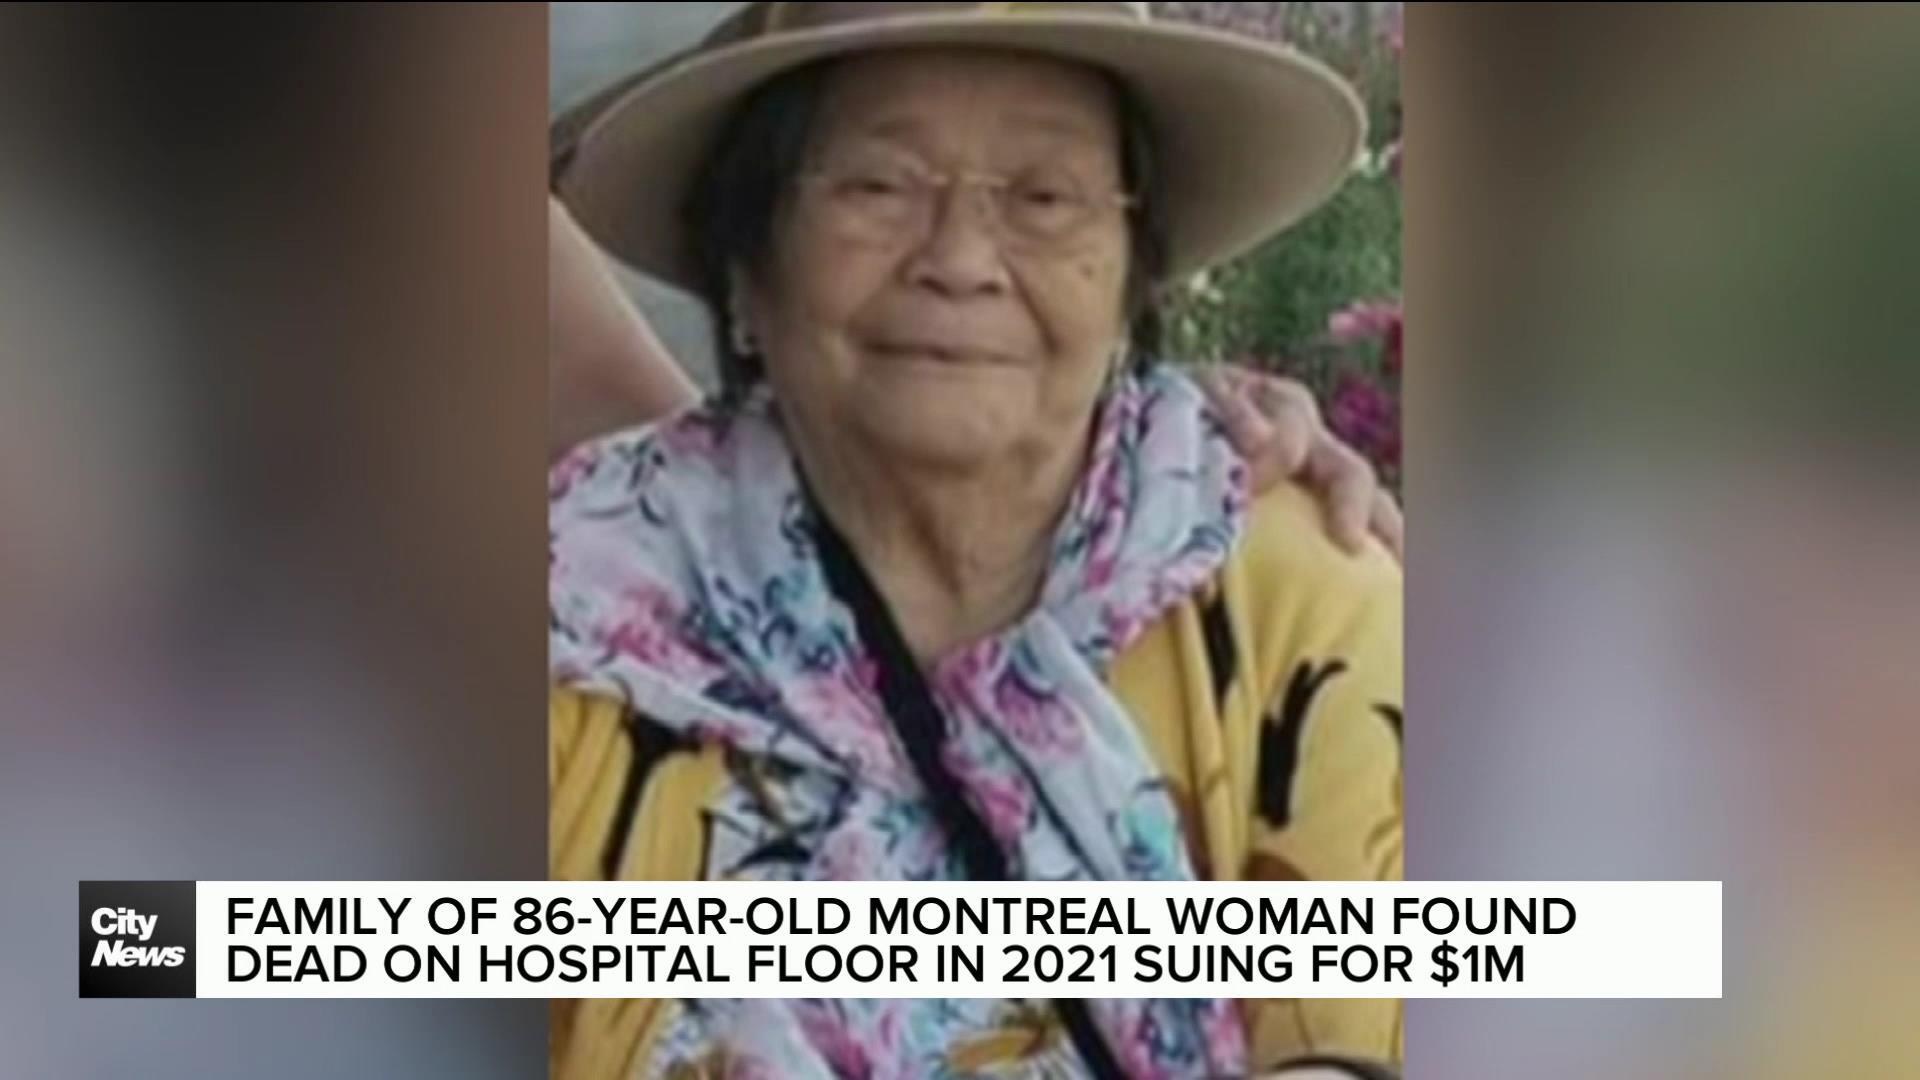 Family of Montreal woman found dead on hospital floor suing for $1M